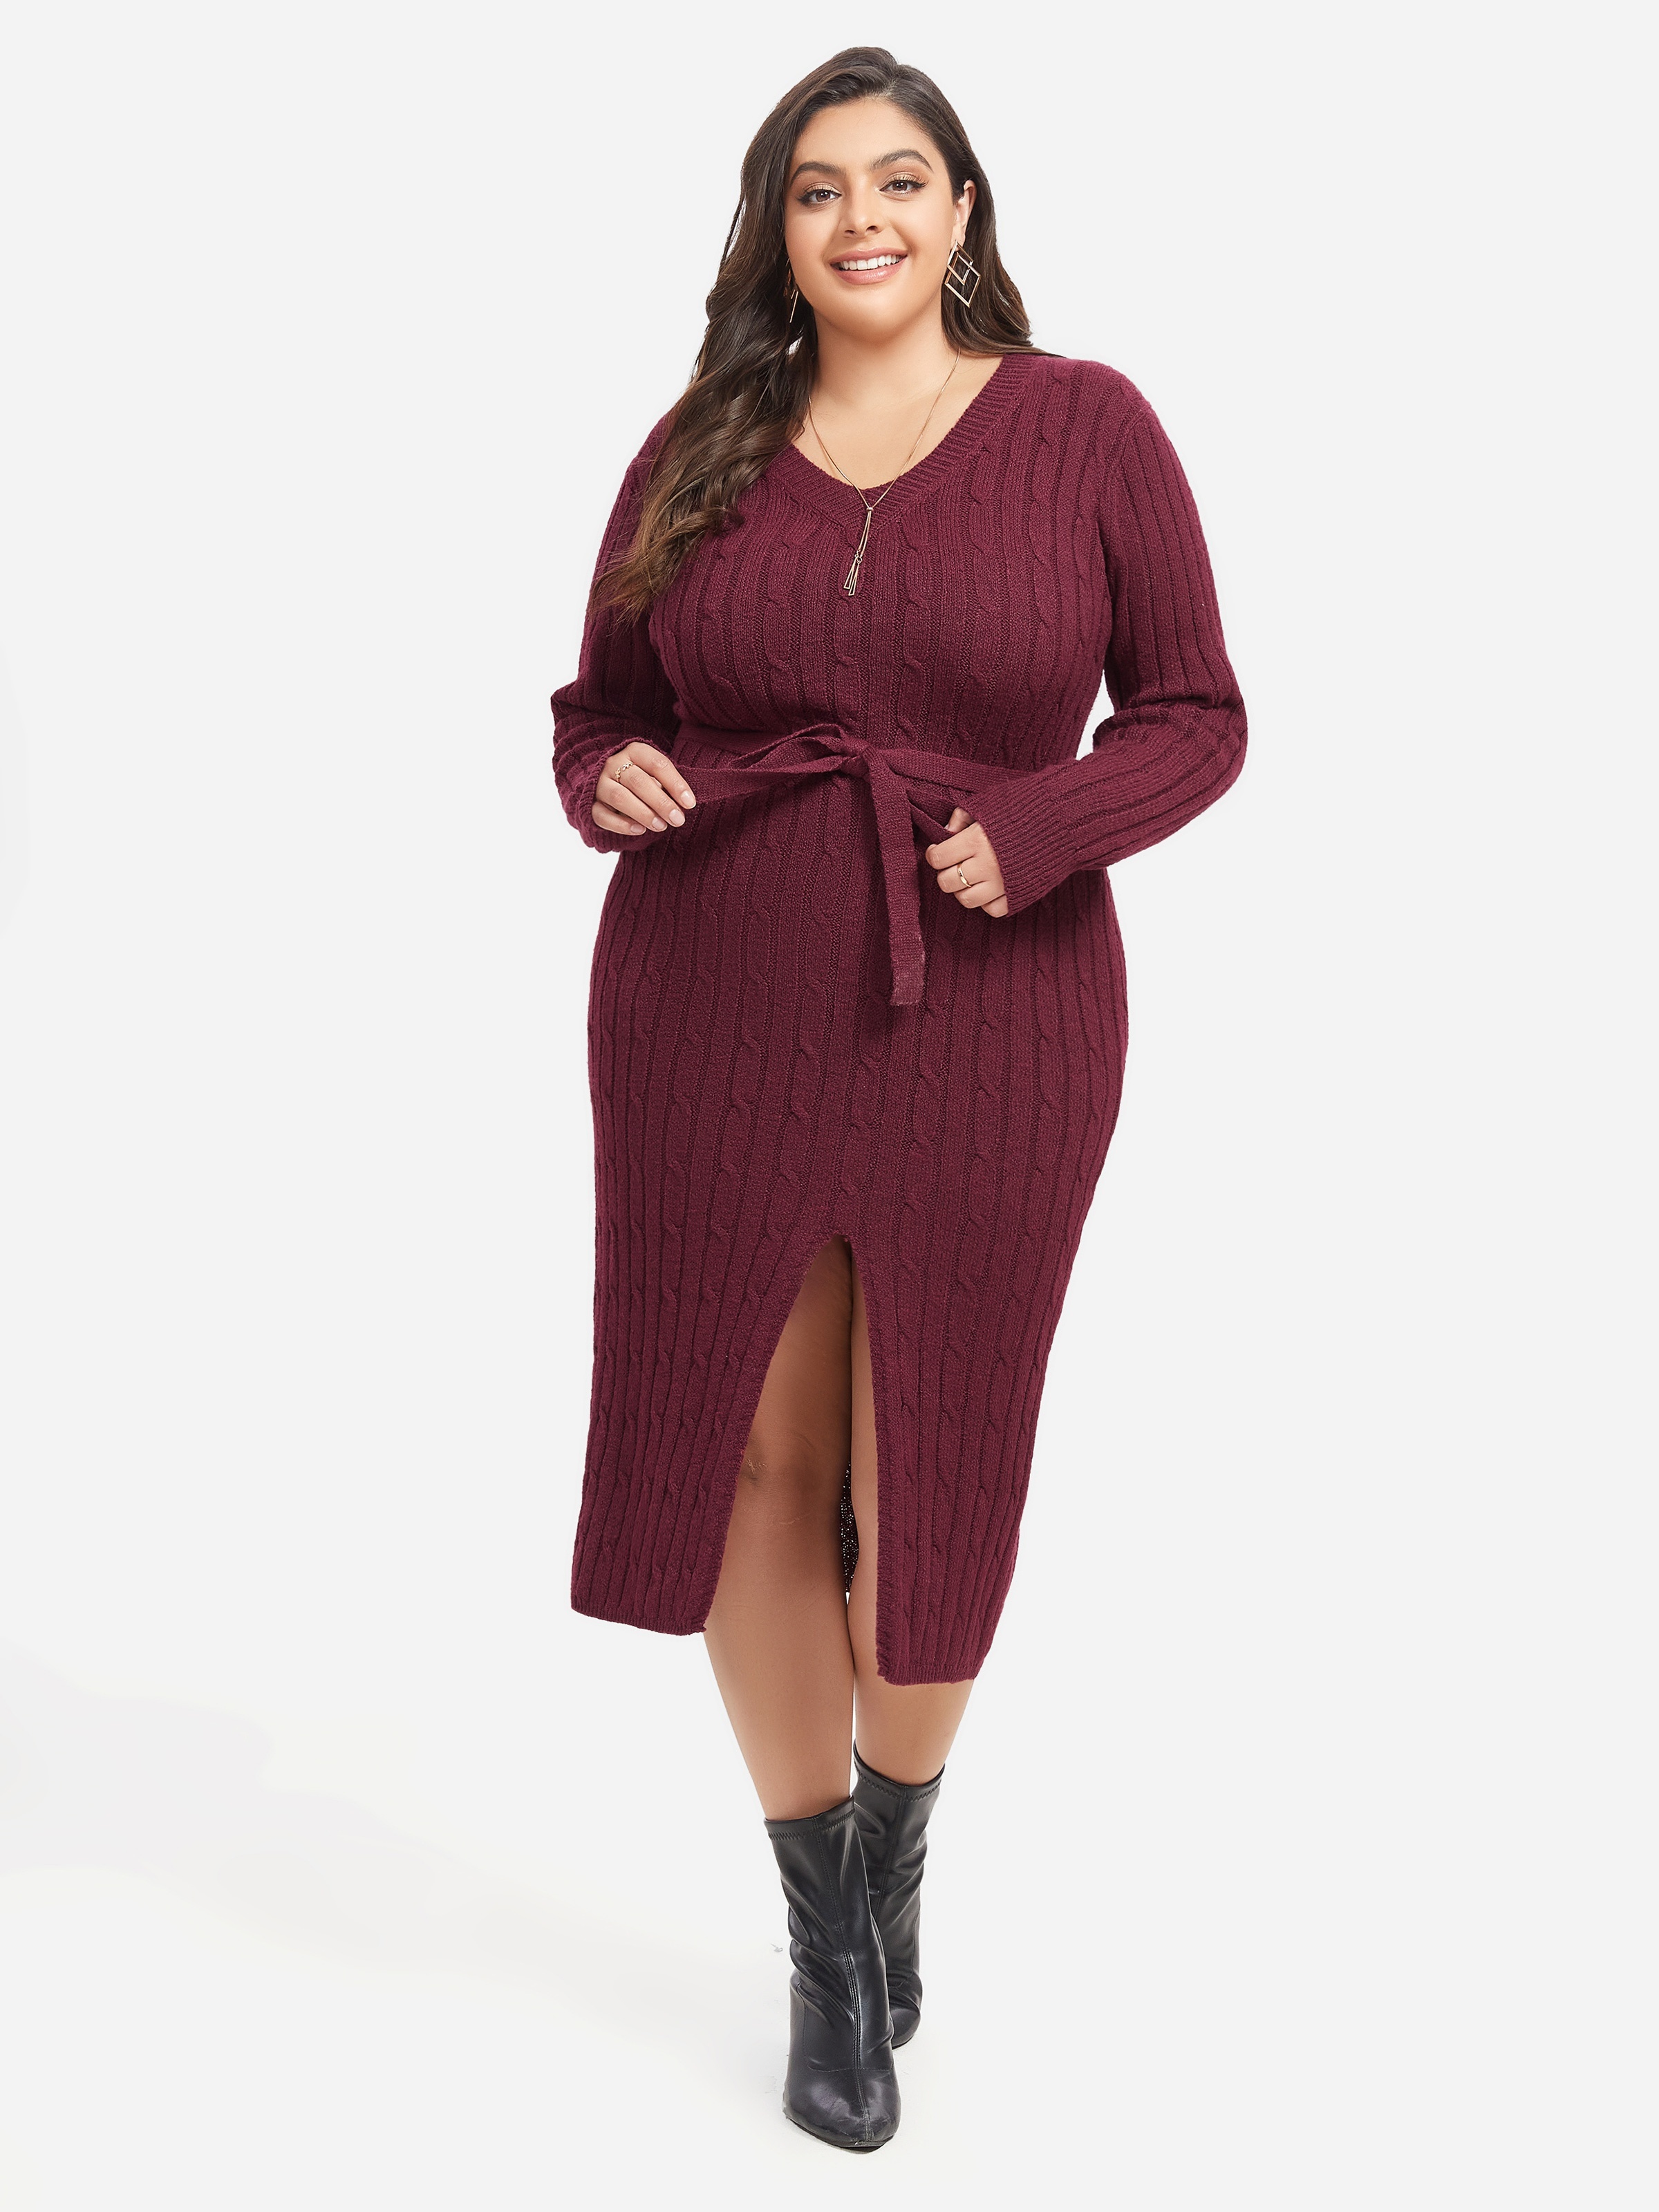  Plus Size Autumn and Winter Dresses Women's Casual